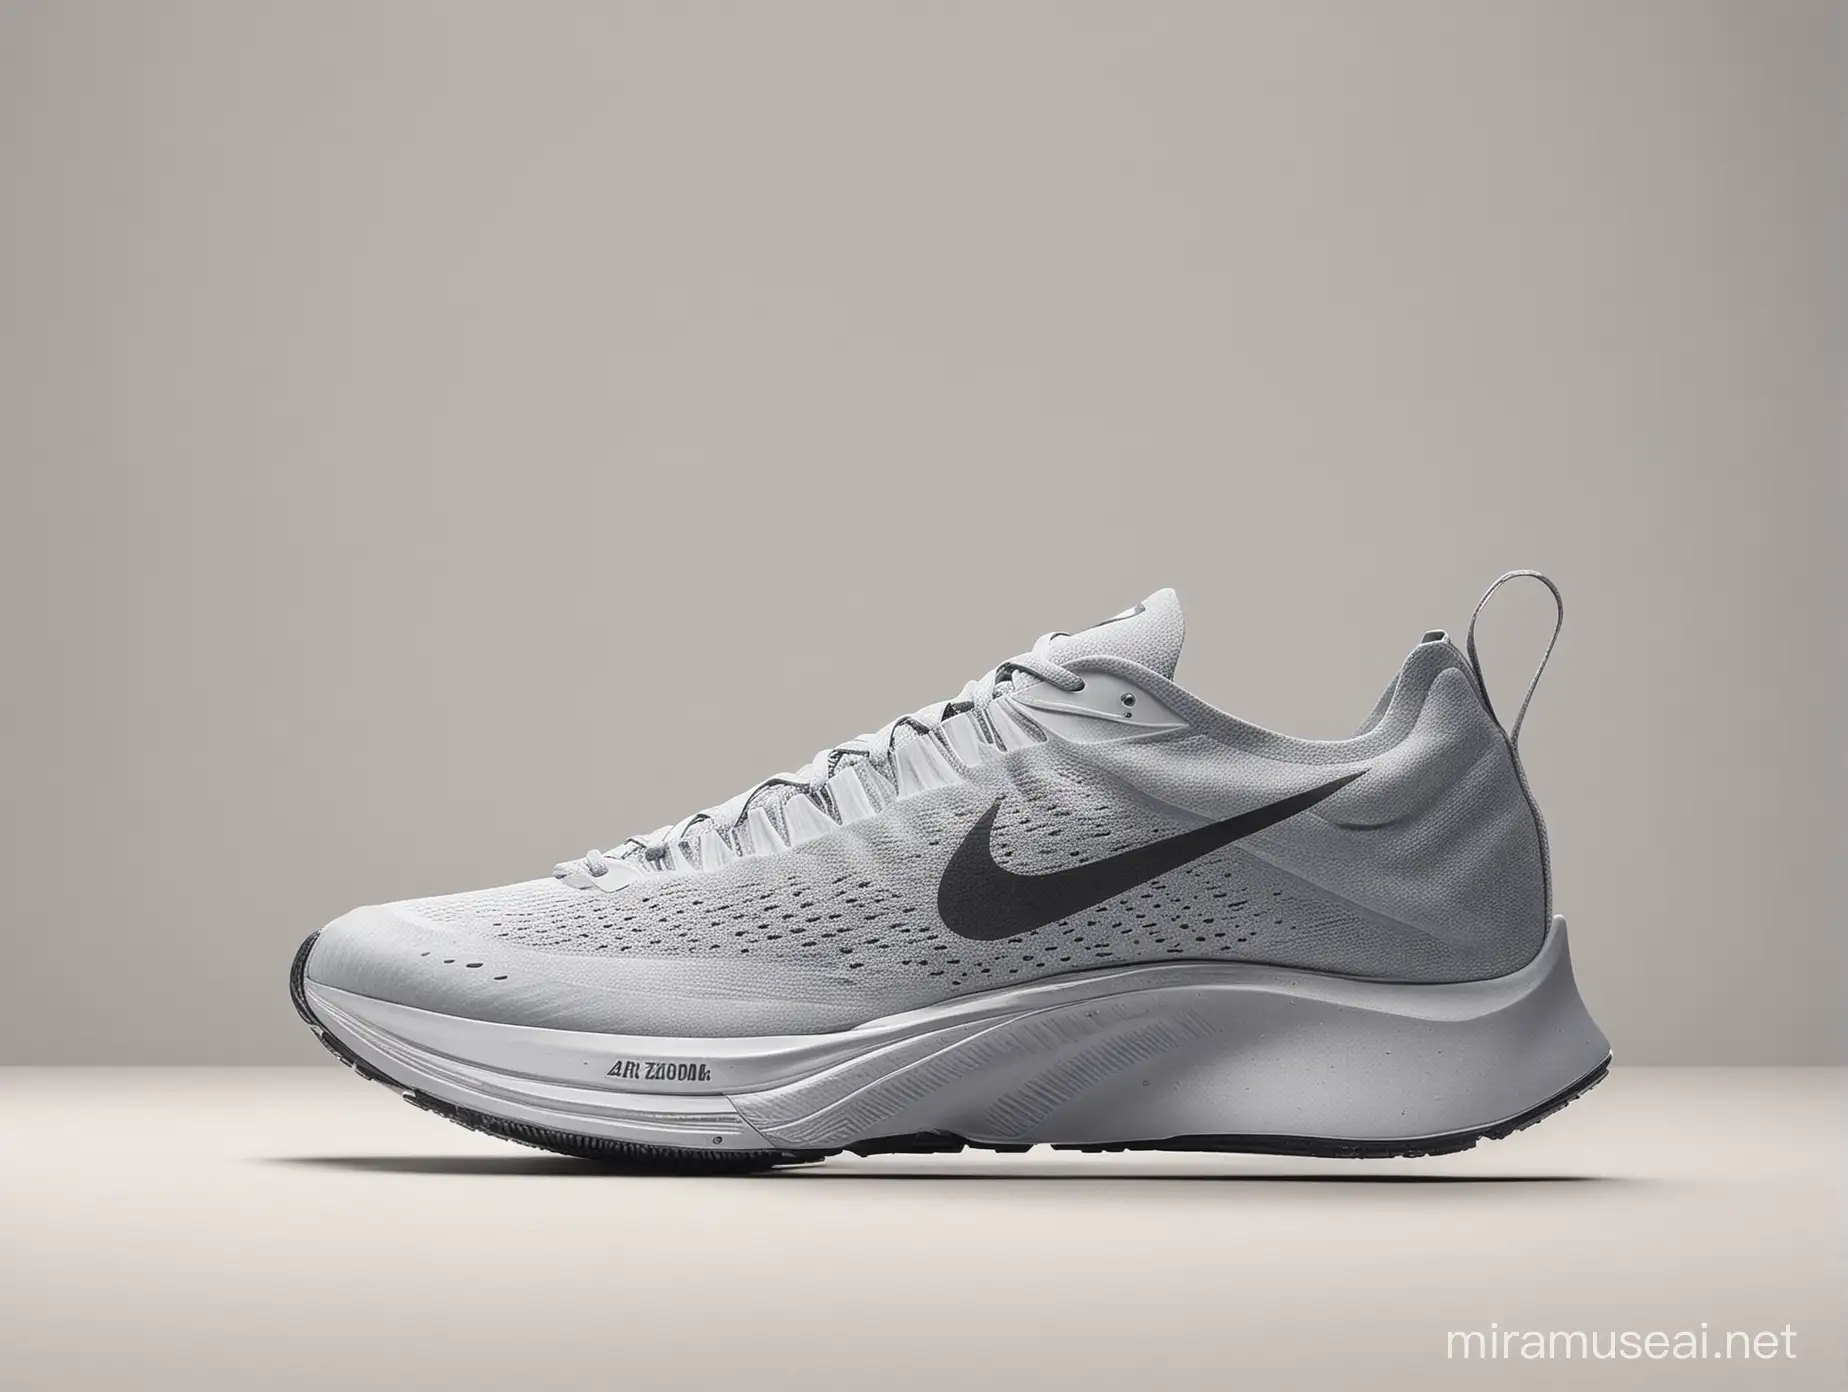 Nike Air Zoom Alphafly Running Shoes on Light Gray Background